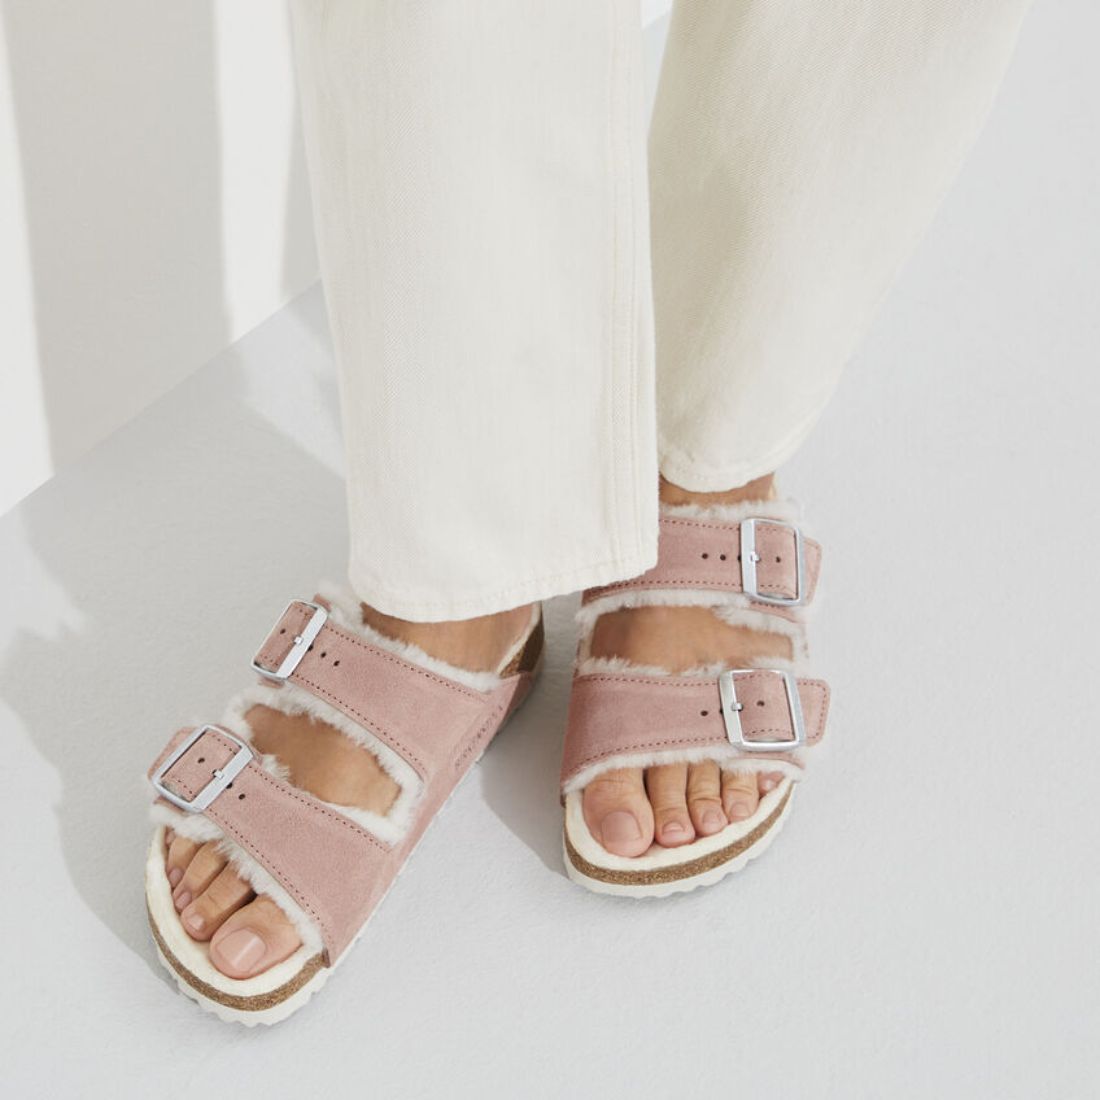 Birkenstock Arizona Shearling Suede in Pink Clay/Natural | Cotton ...